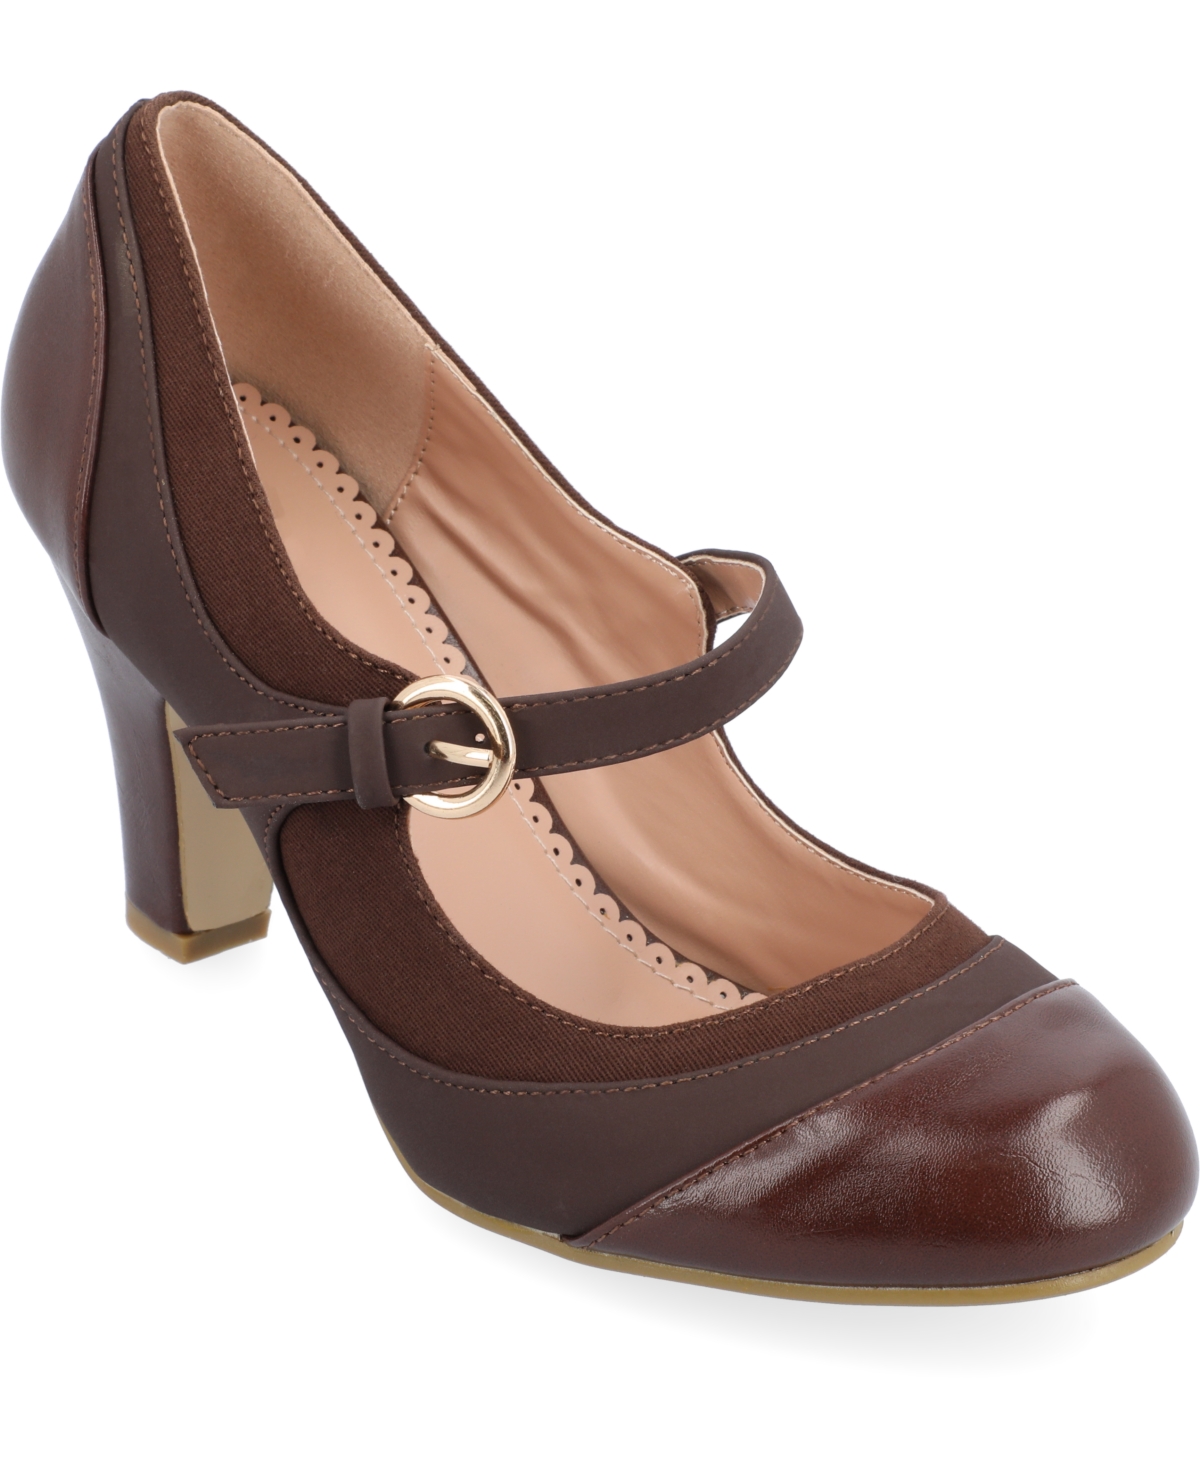 Downton Abbey Shoes- 5 Styles You Can Wear Journee Collection Womens Siri Tweed Buckle Heels - Brown $42.74 AT vintagedancer.com